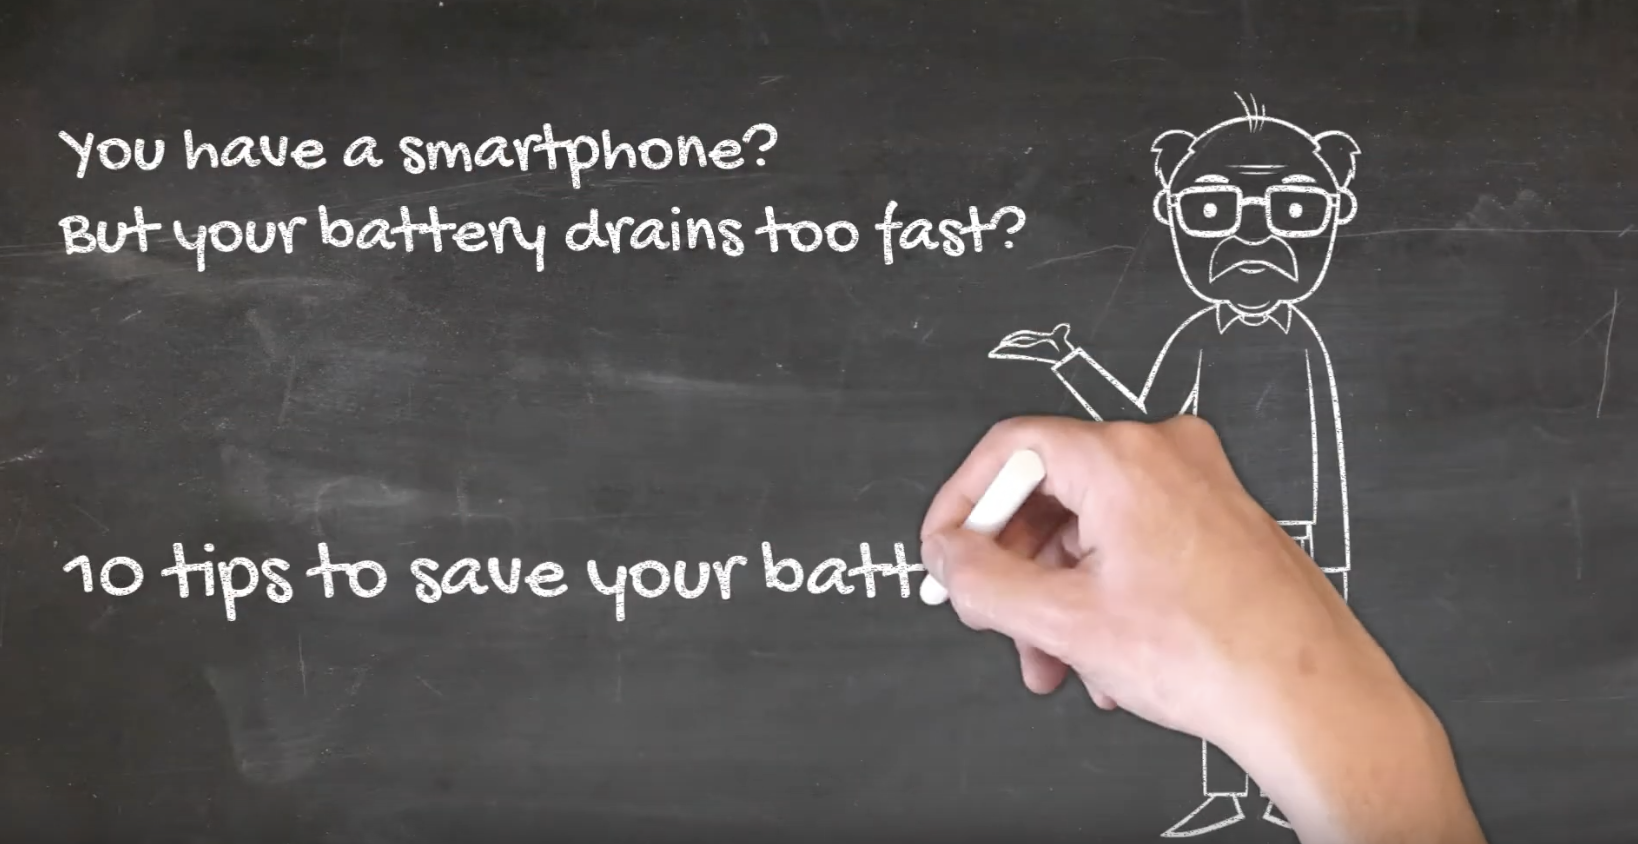 So you have a smartphone, but are not impressed by its battery life? Try these 10 tips to make it last longer!